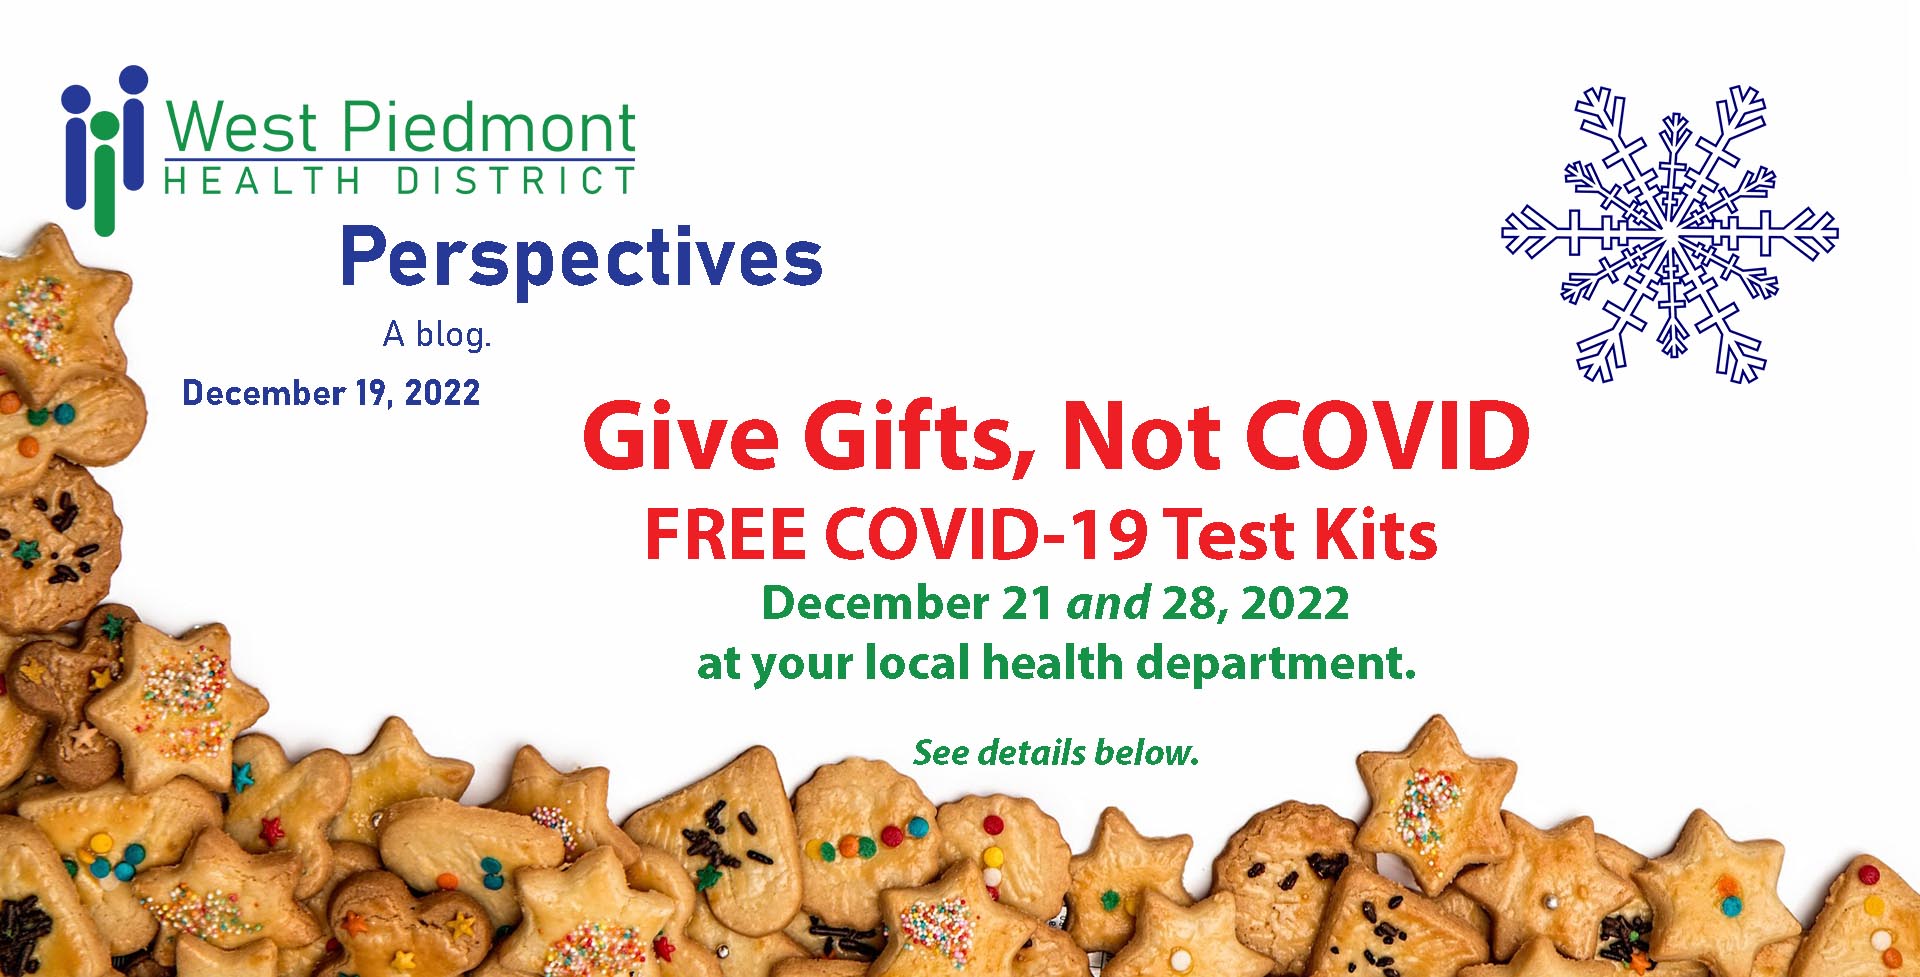 Perspectives cover announcing Free COVID Test Kits December 21 and 28 at your local health department. See below for details.